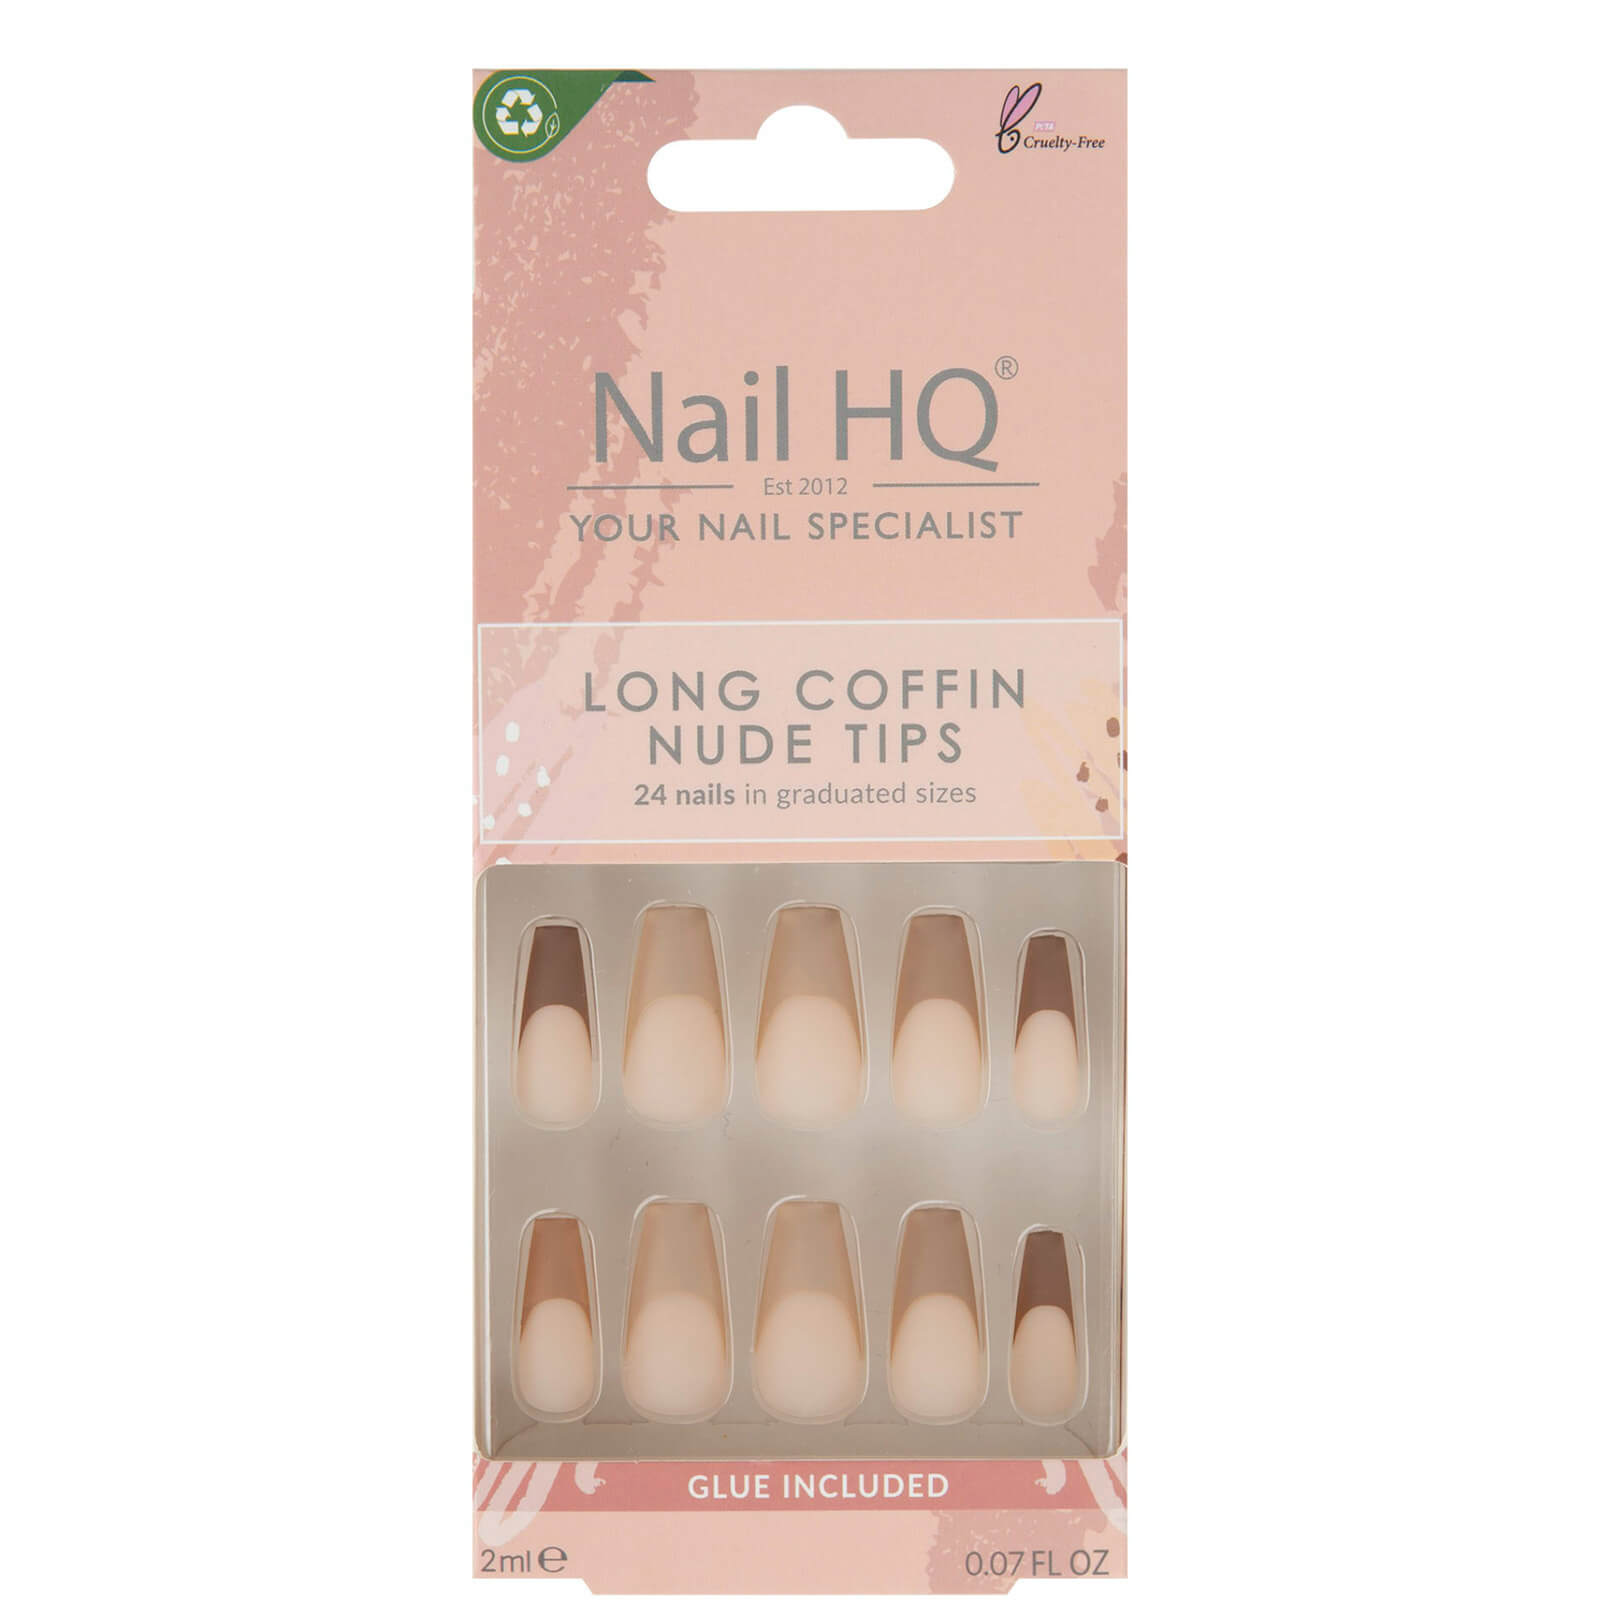 Nail Hq Long Coffin Nude Tip Nails (24 Pieces)